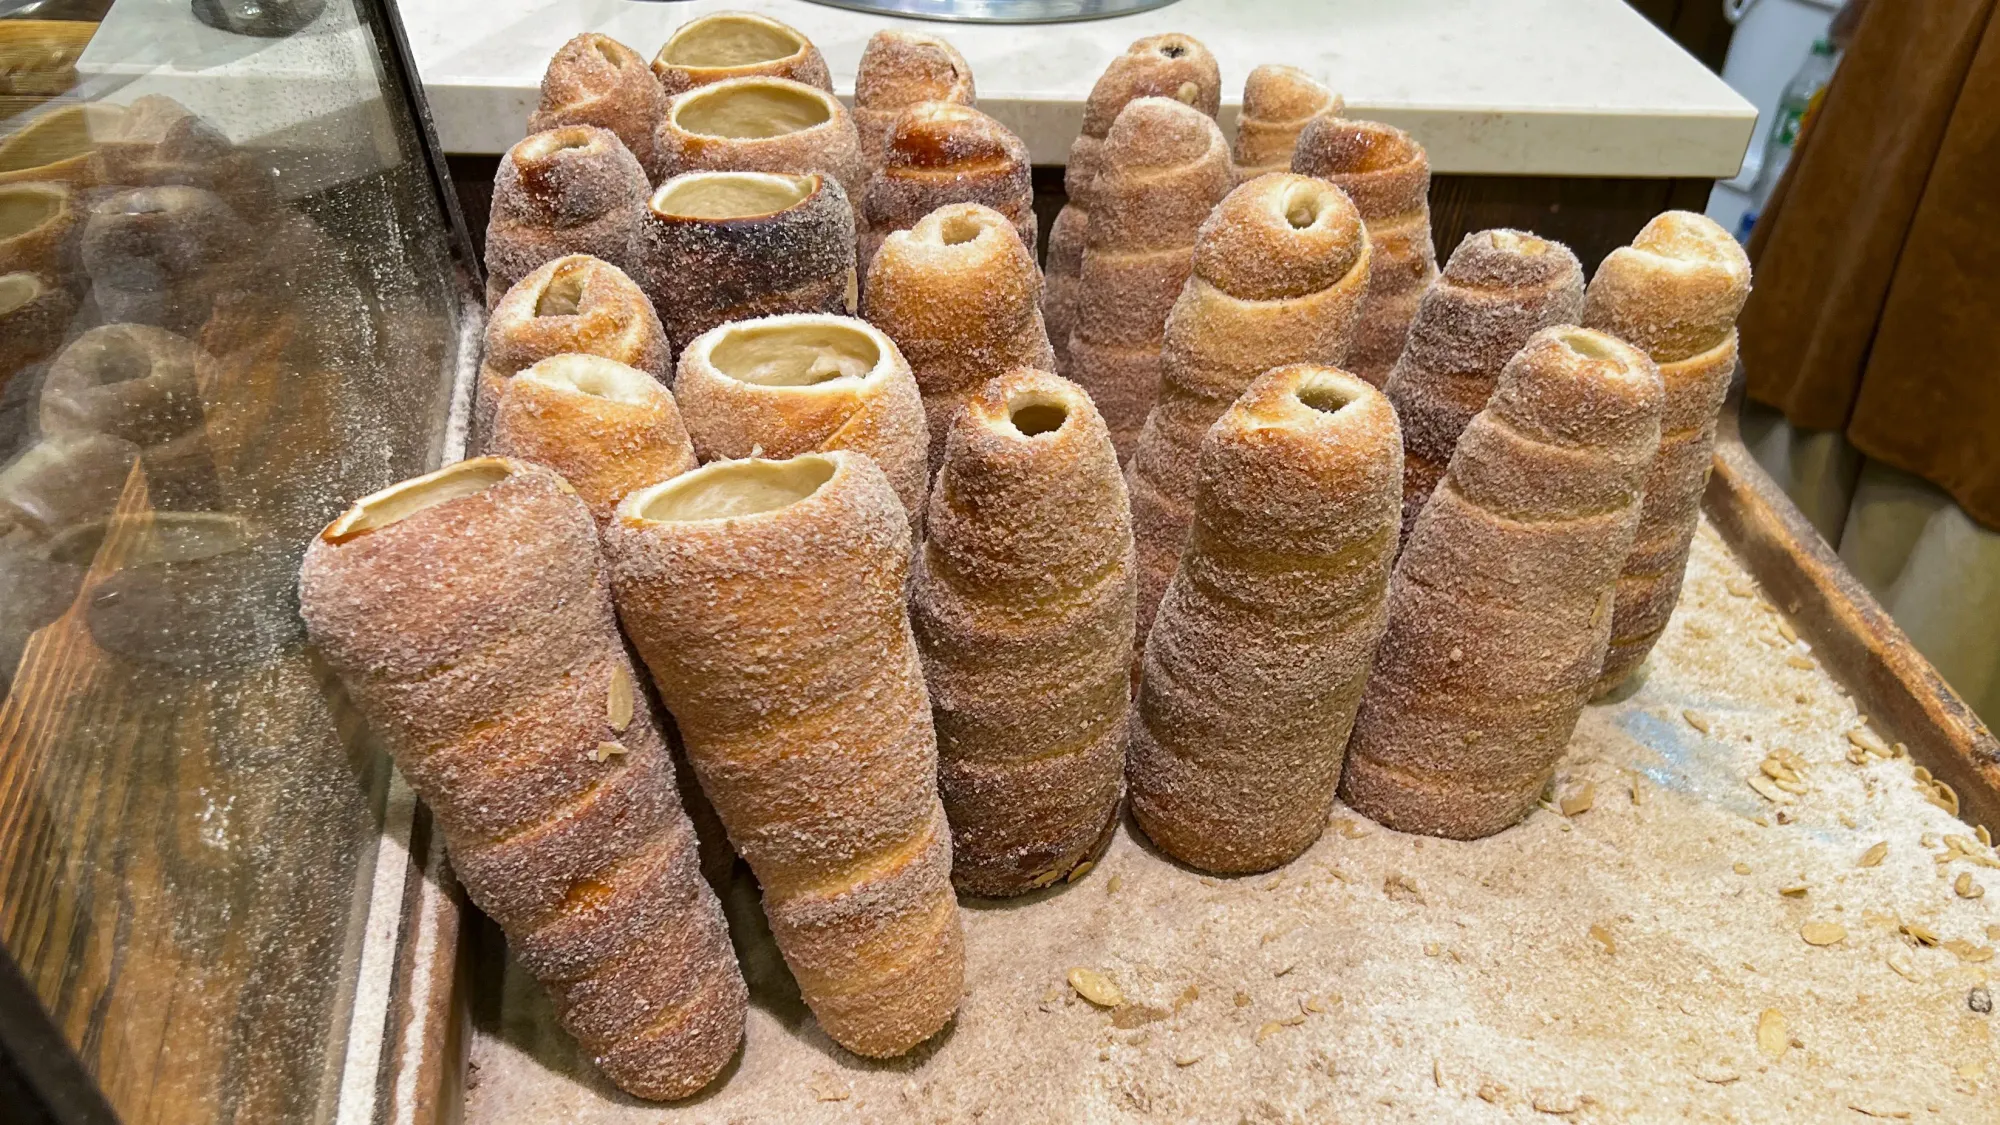 Chimney cakes covered in cinnamon sugar